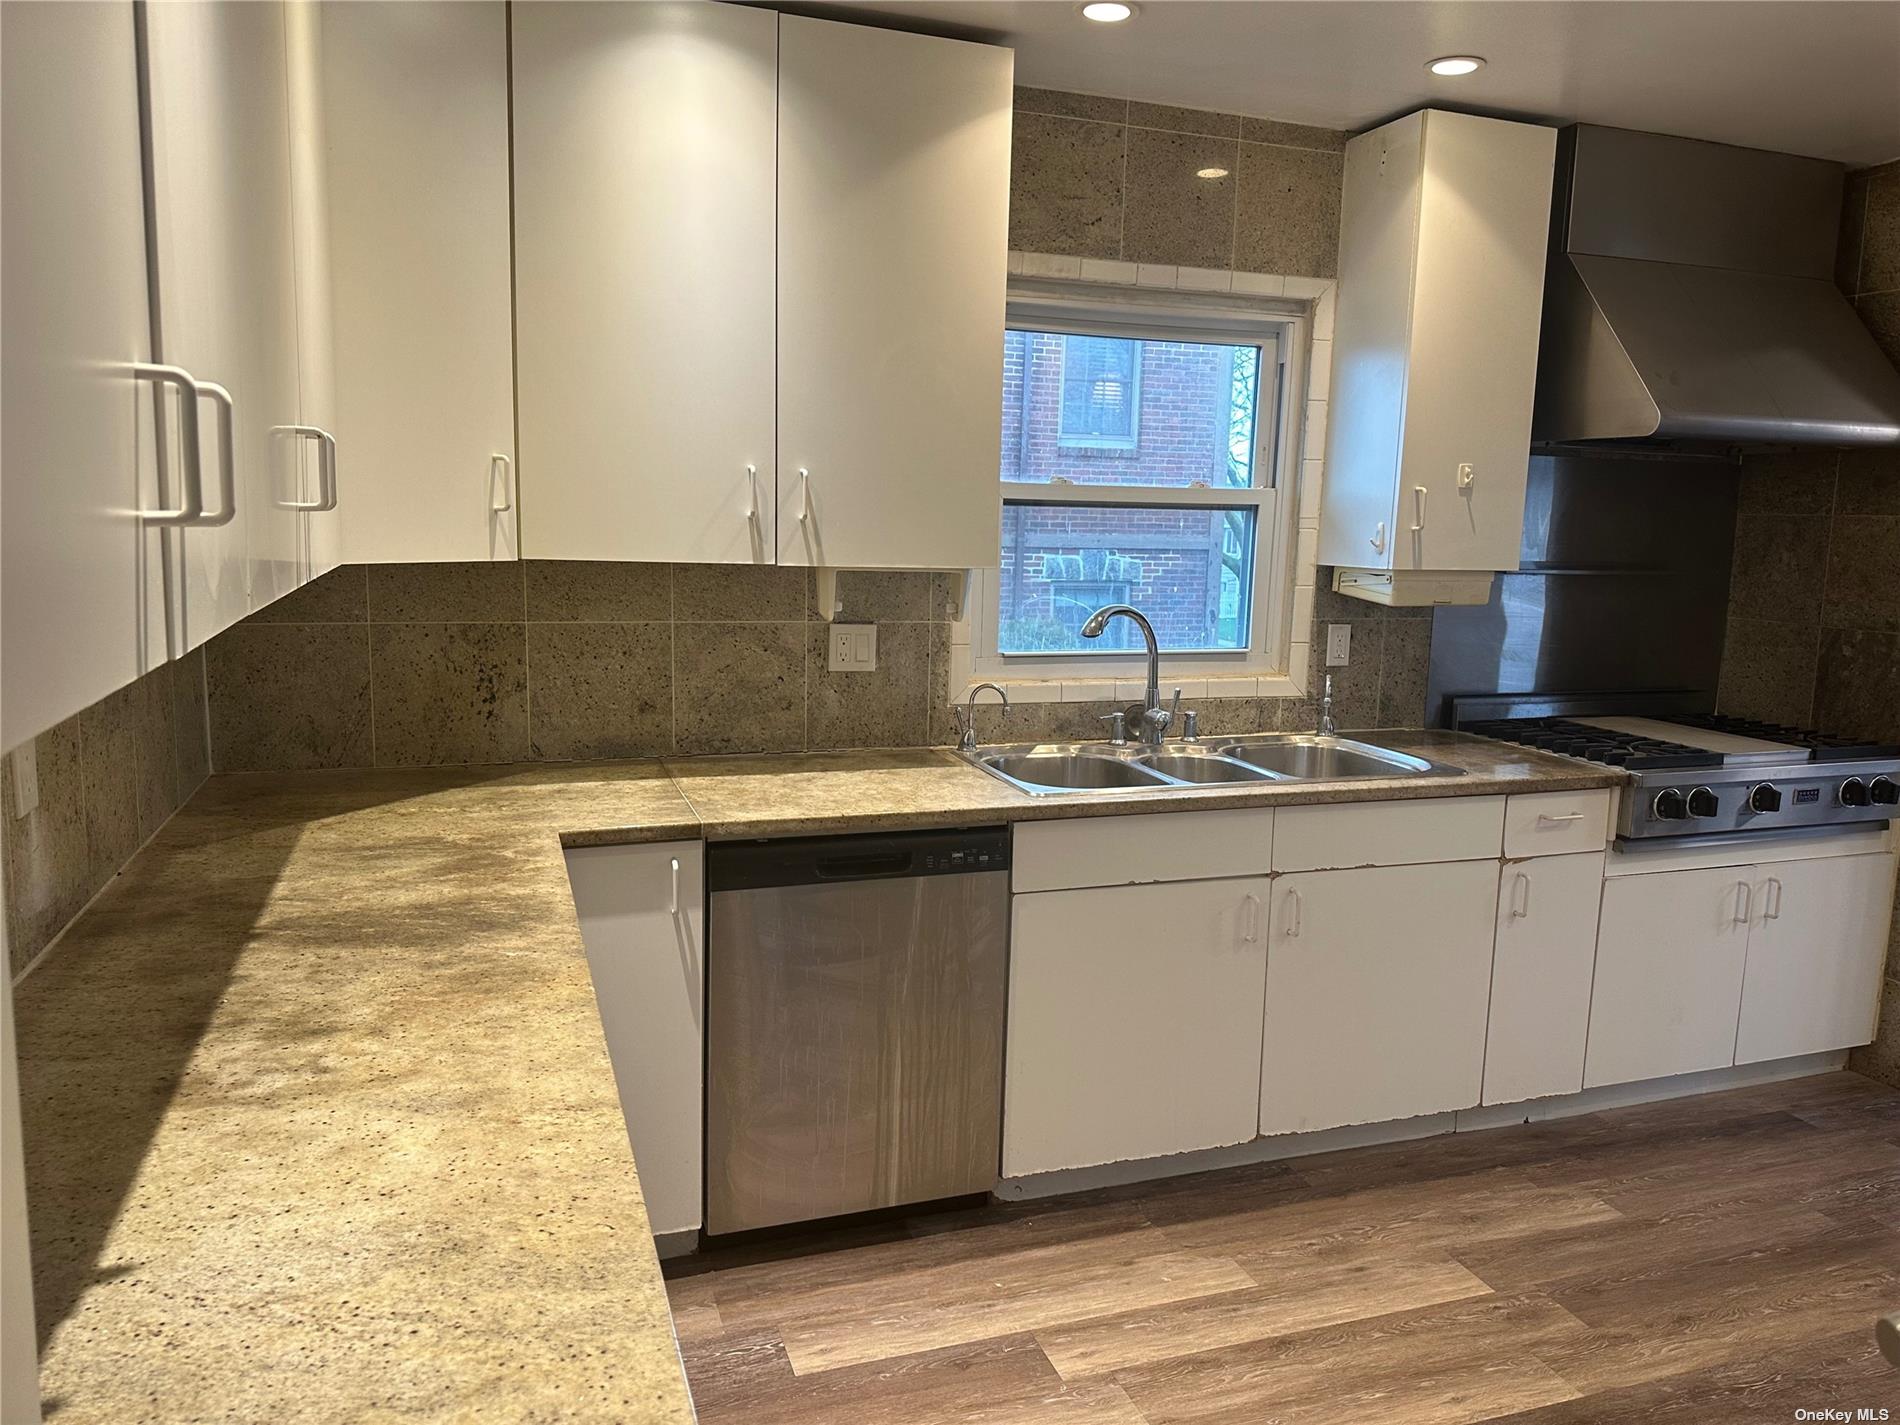 a kitchen with granite countertop a sink and a stove